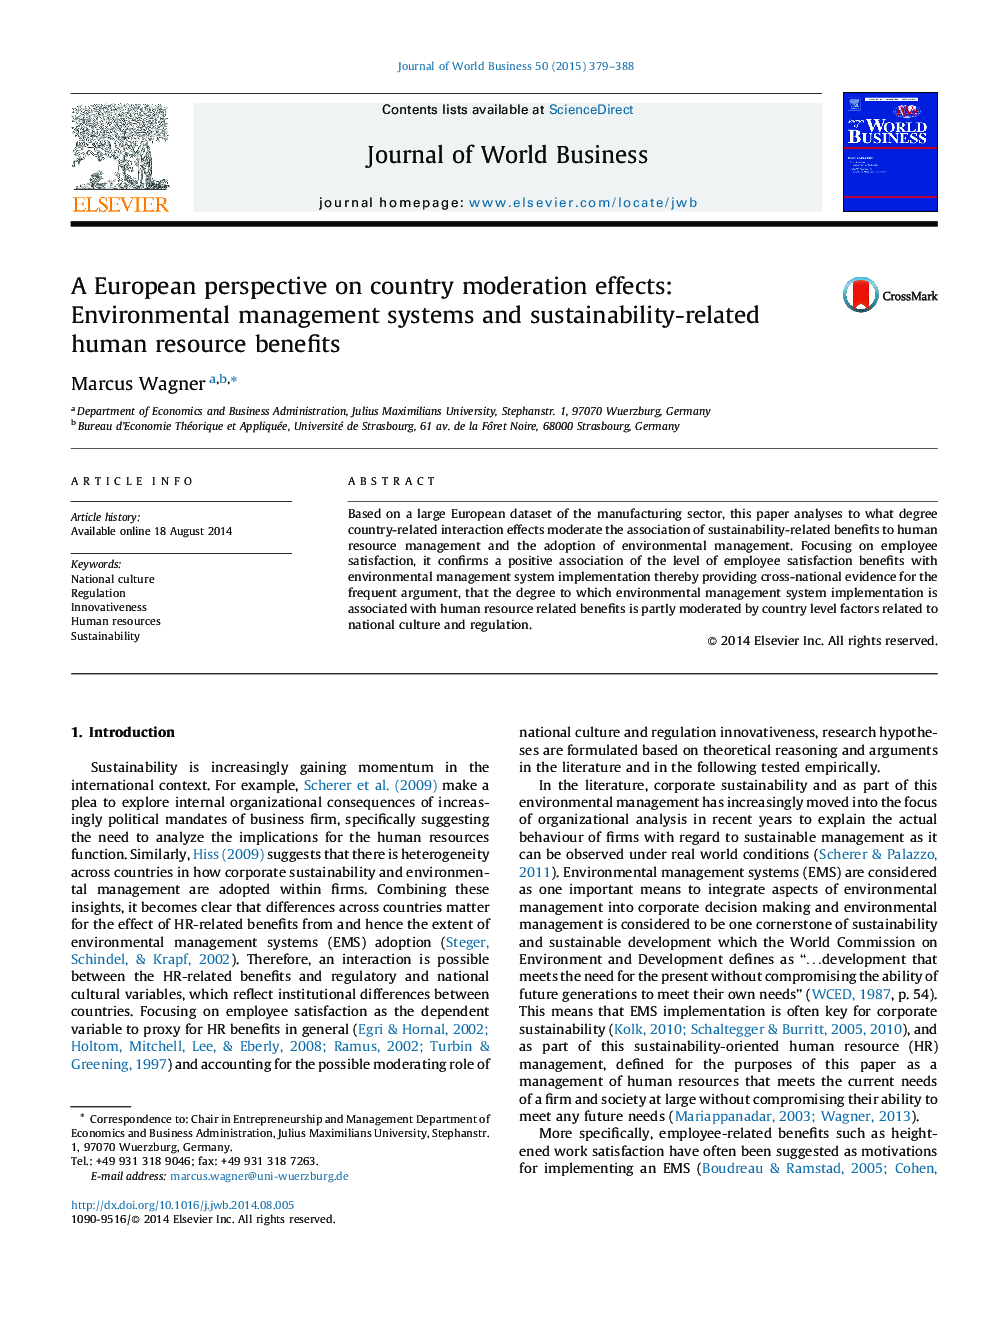 A European perspective on country moderation effects: Environmental management systems and sustainability-related human resource benefits